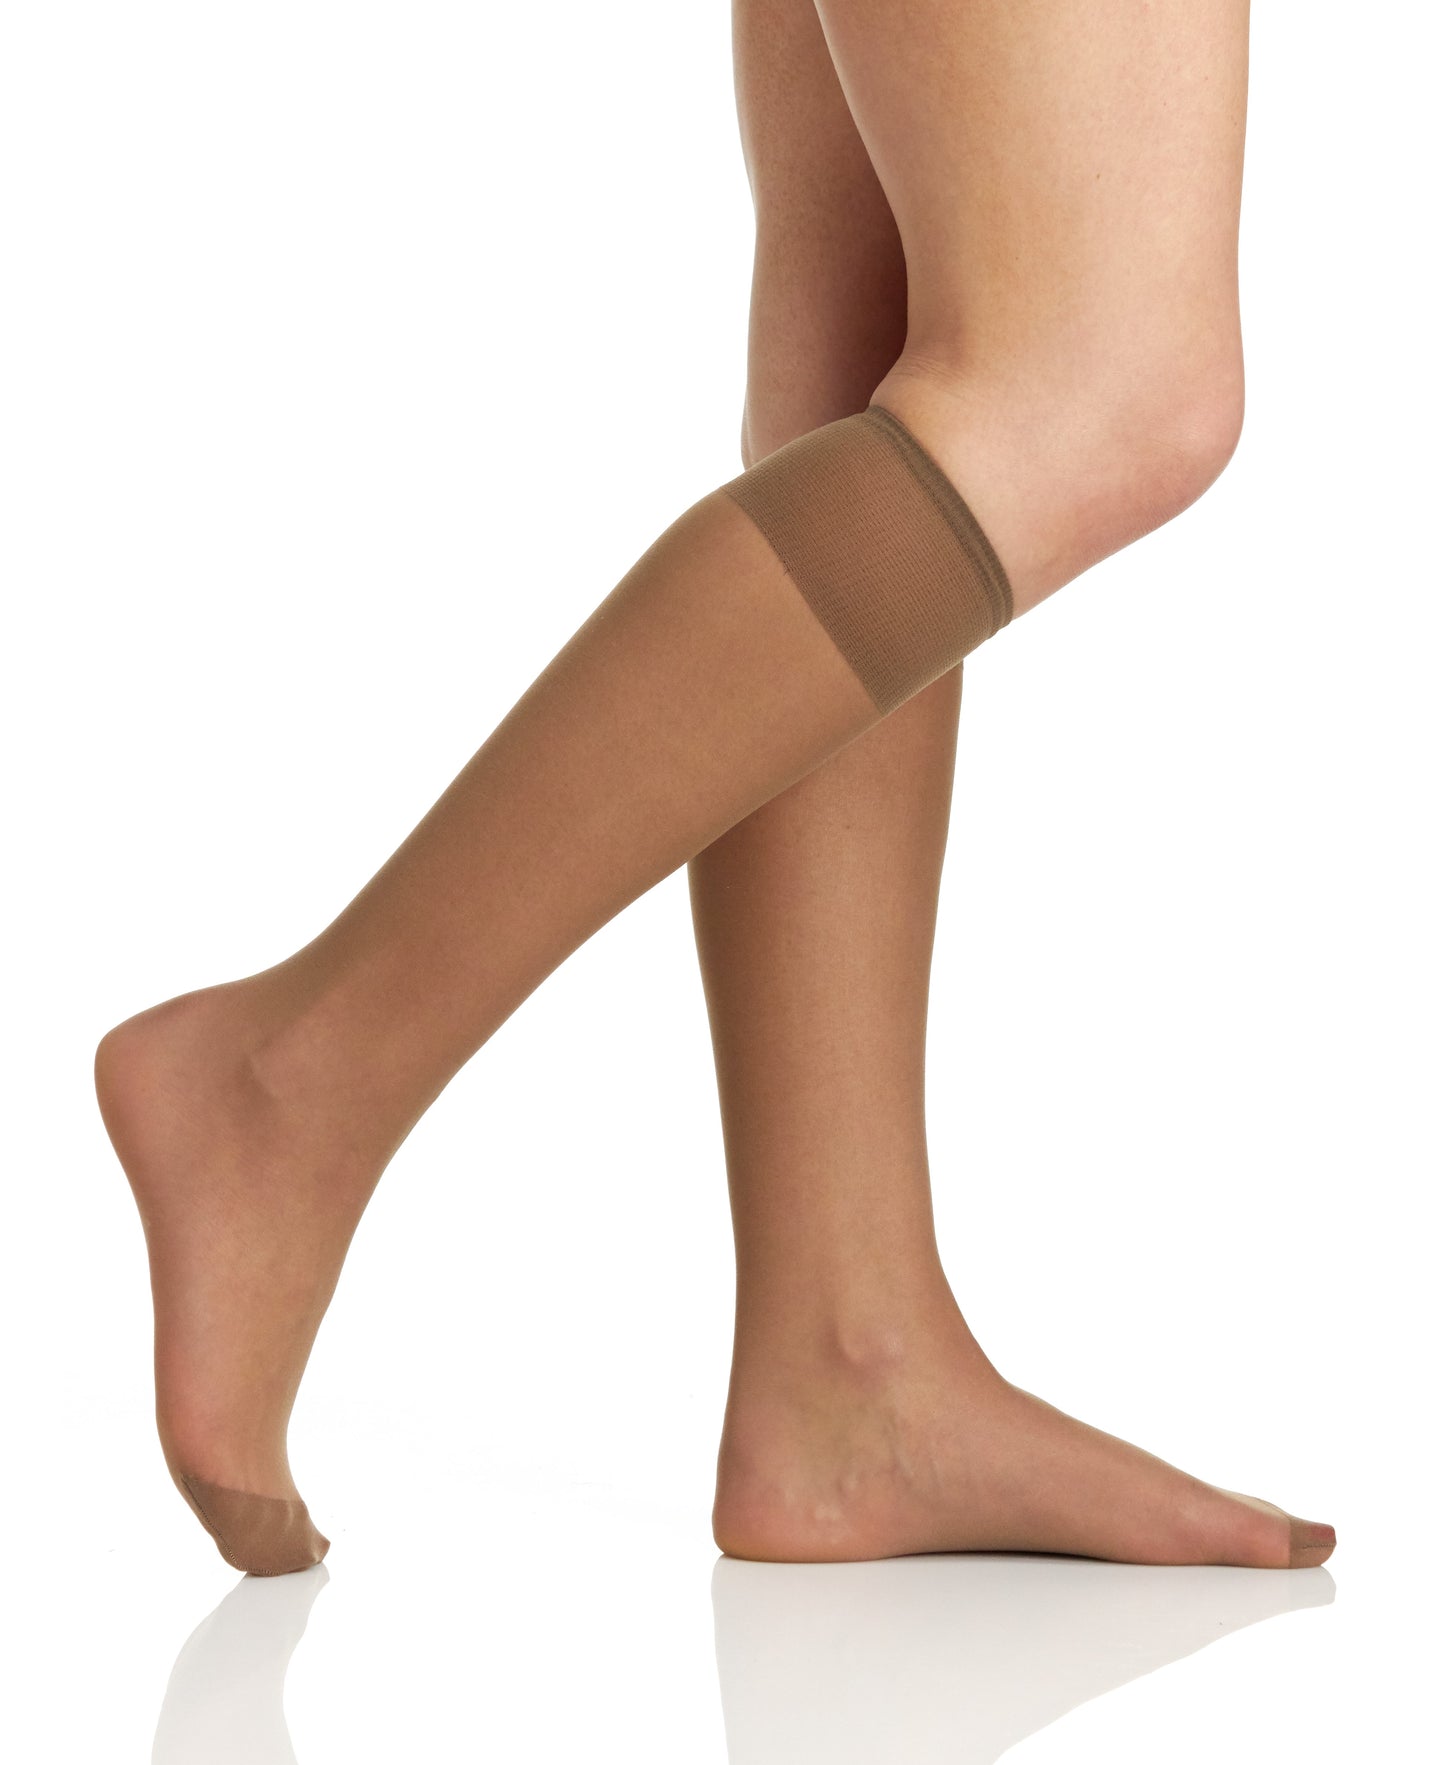 3 Pair Pack  All Day Sheer Knee High with Reinforced Toe